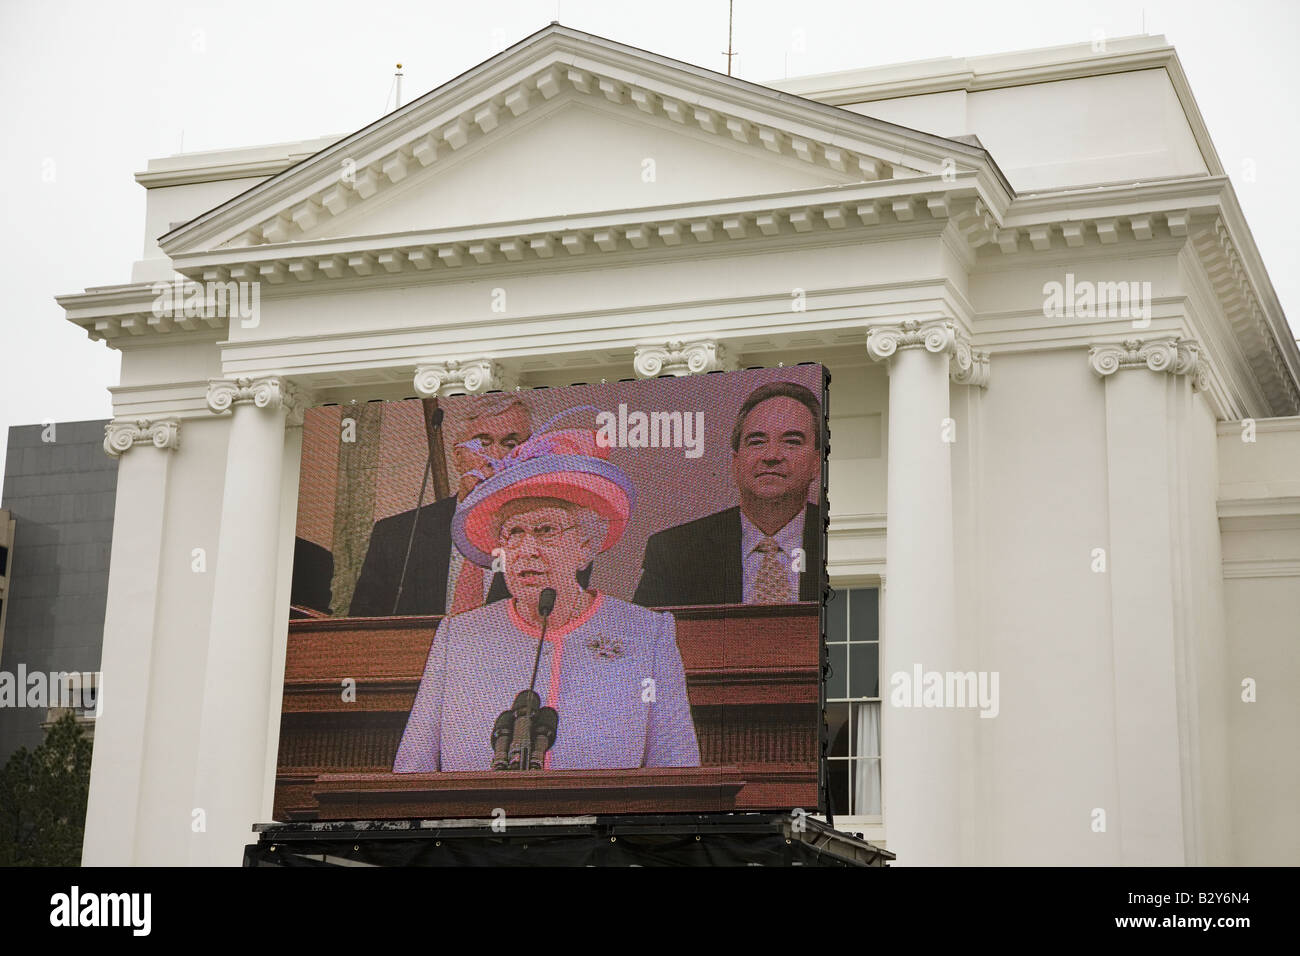 Queen Elizabeth II speaking on a large television monitor to the VA State Assembly, at the VA State Capitol in Richmond VA Stock Photo